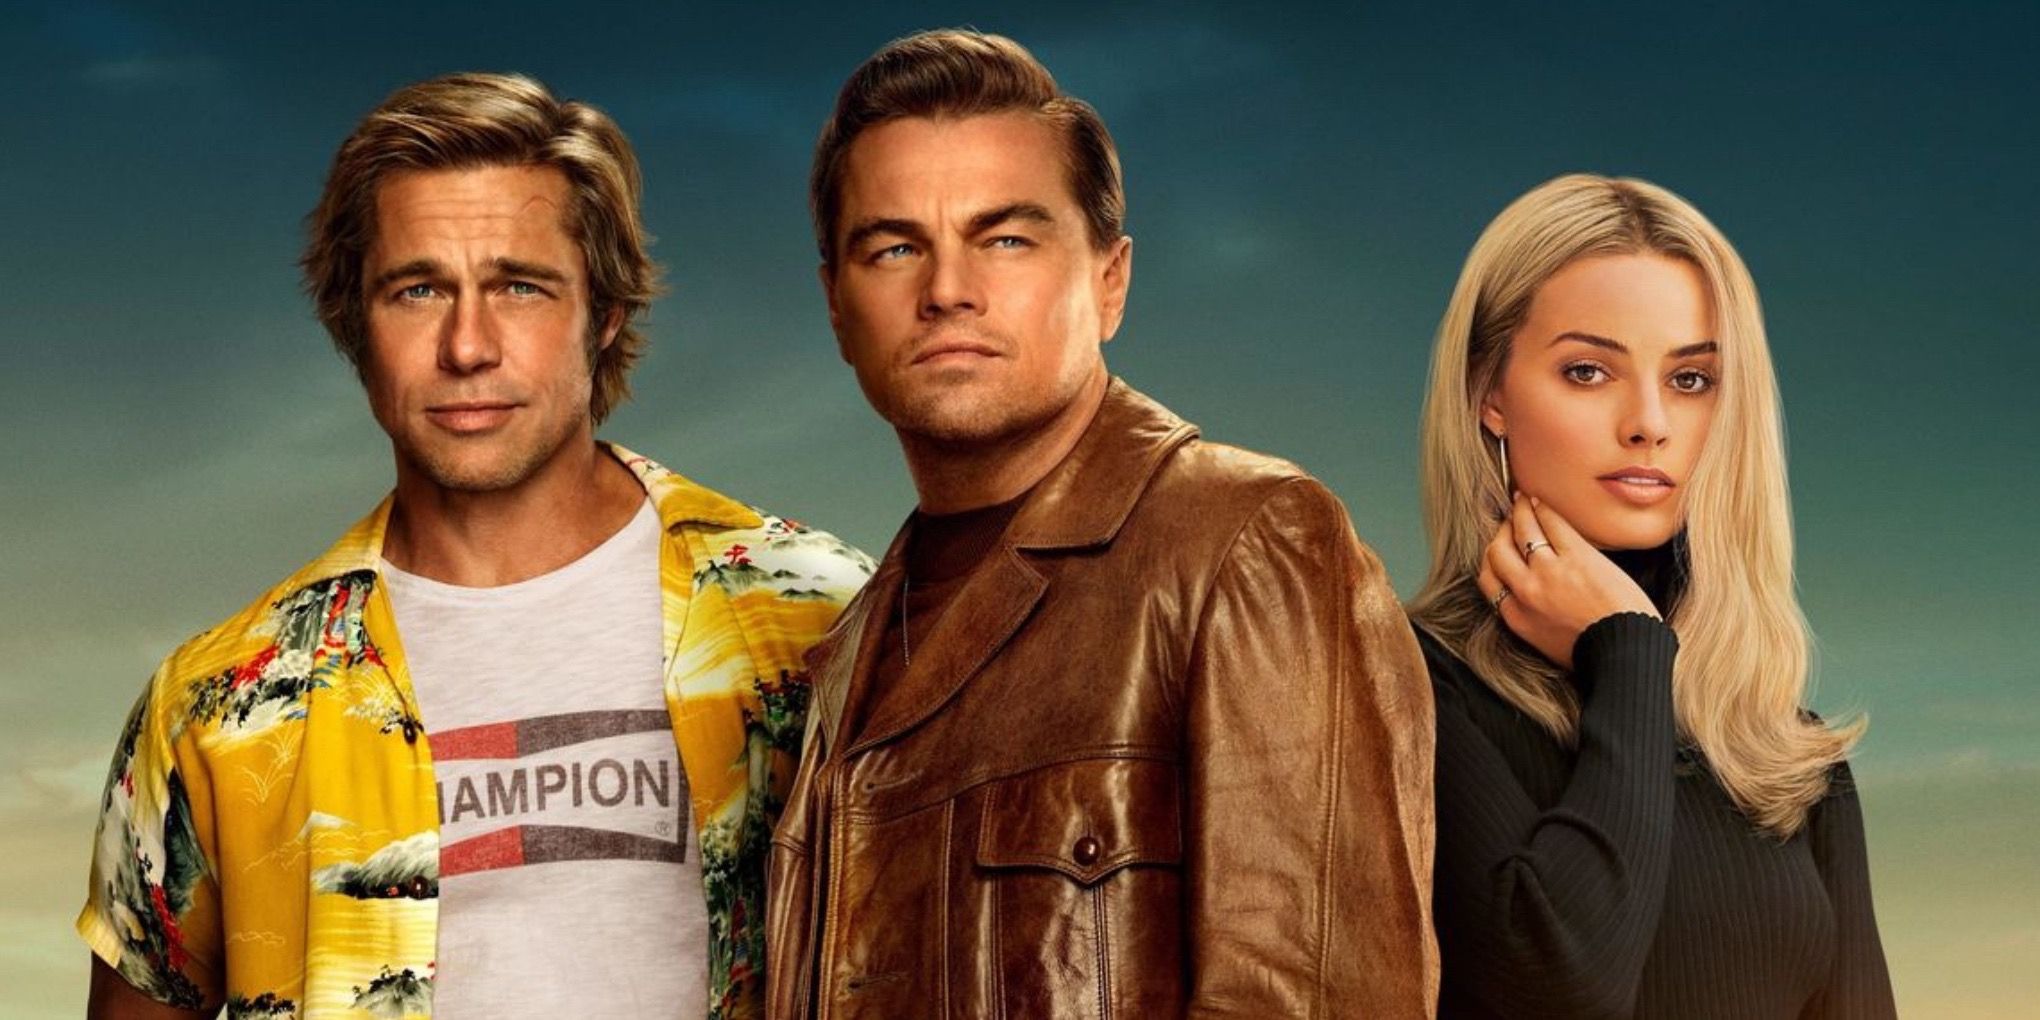 Brad Pitt, Leonardo DiCaprio, and Margot Robbie in Once Upon A Time In Hollywood (2019)